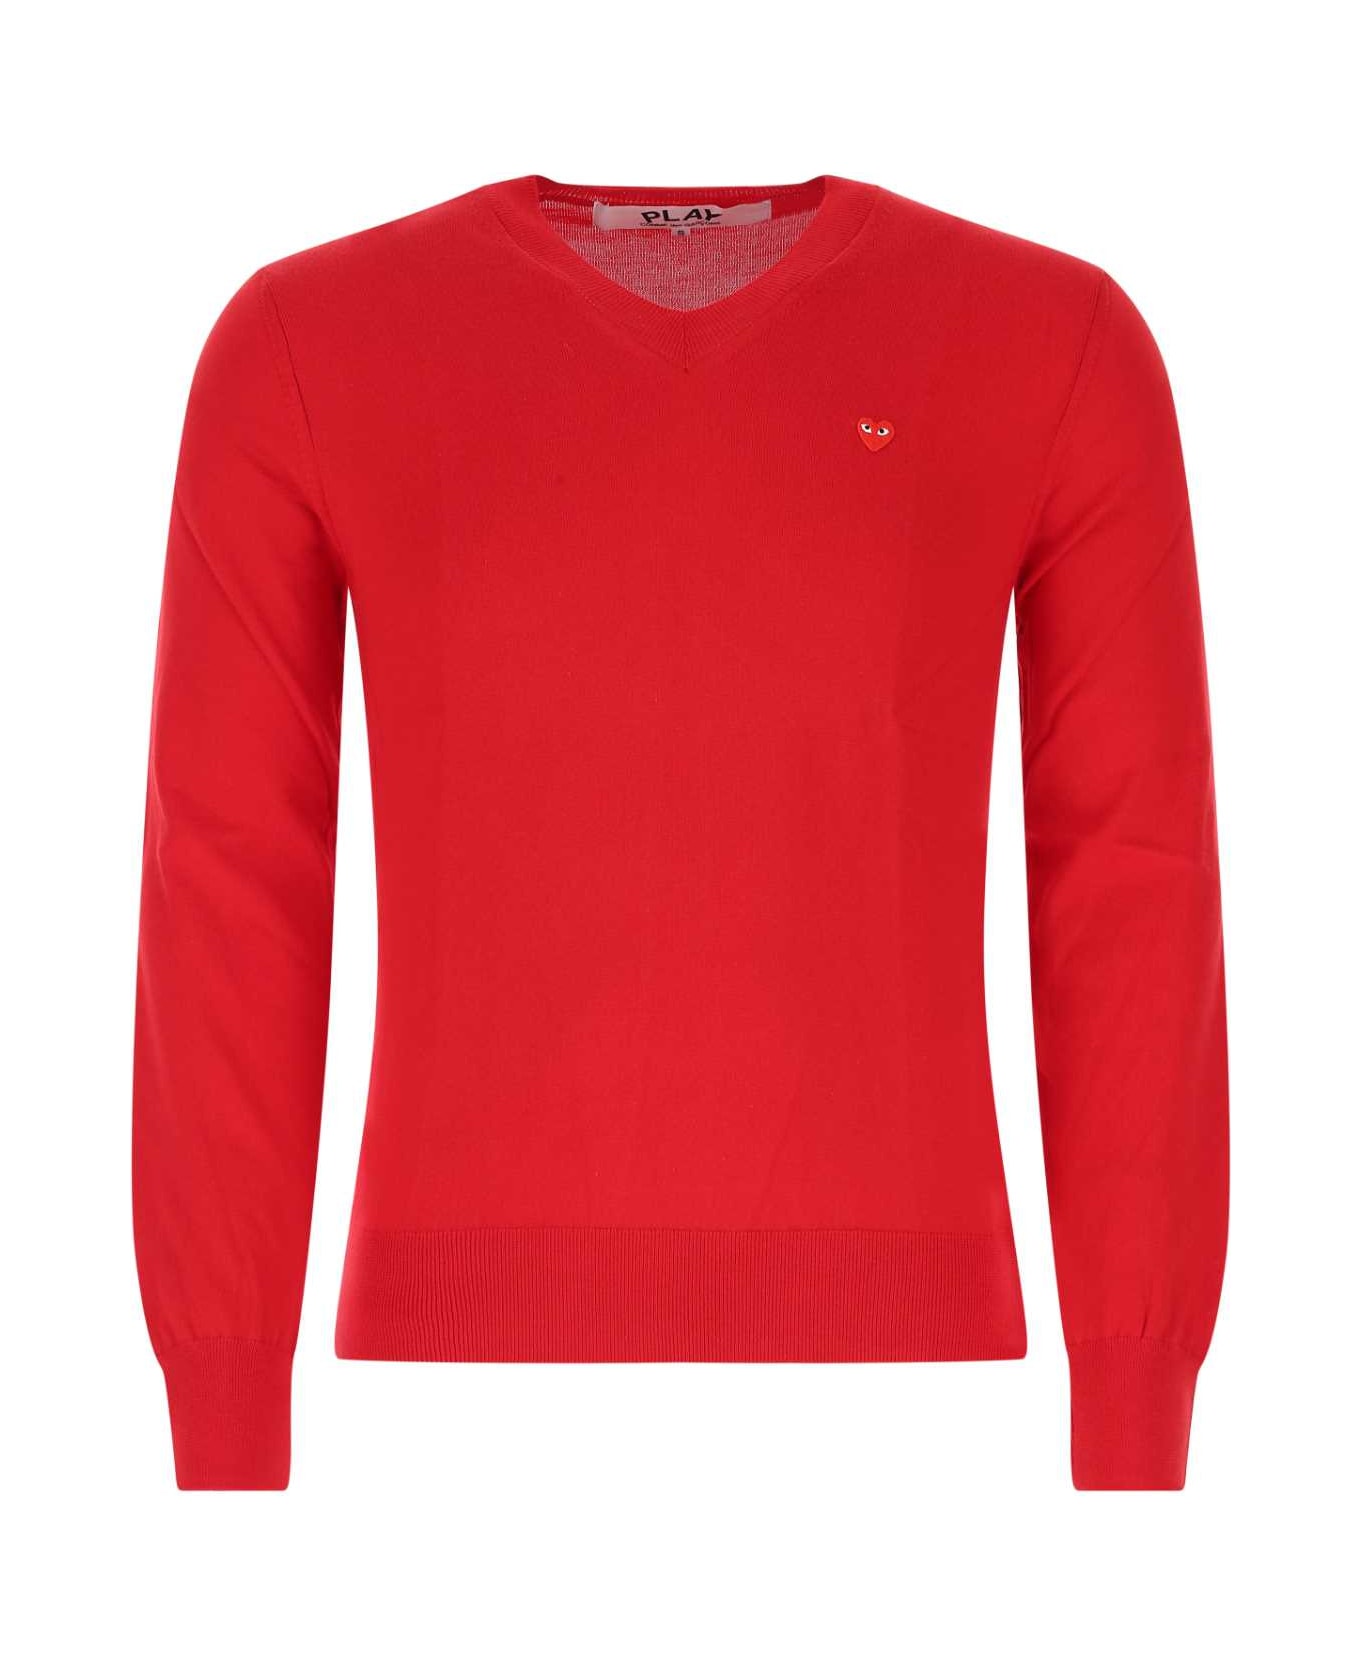 Comme des Garçons Play Red Cotton Sweater - RED